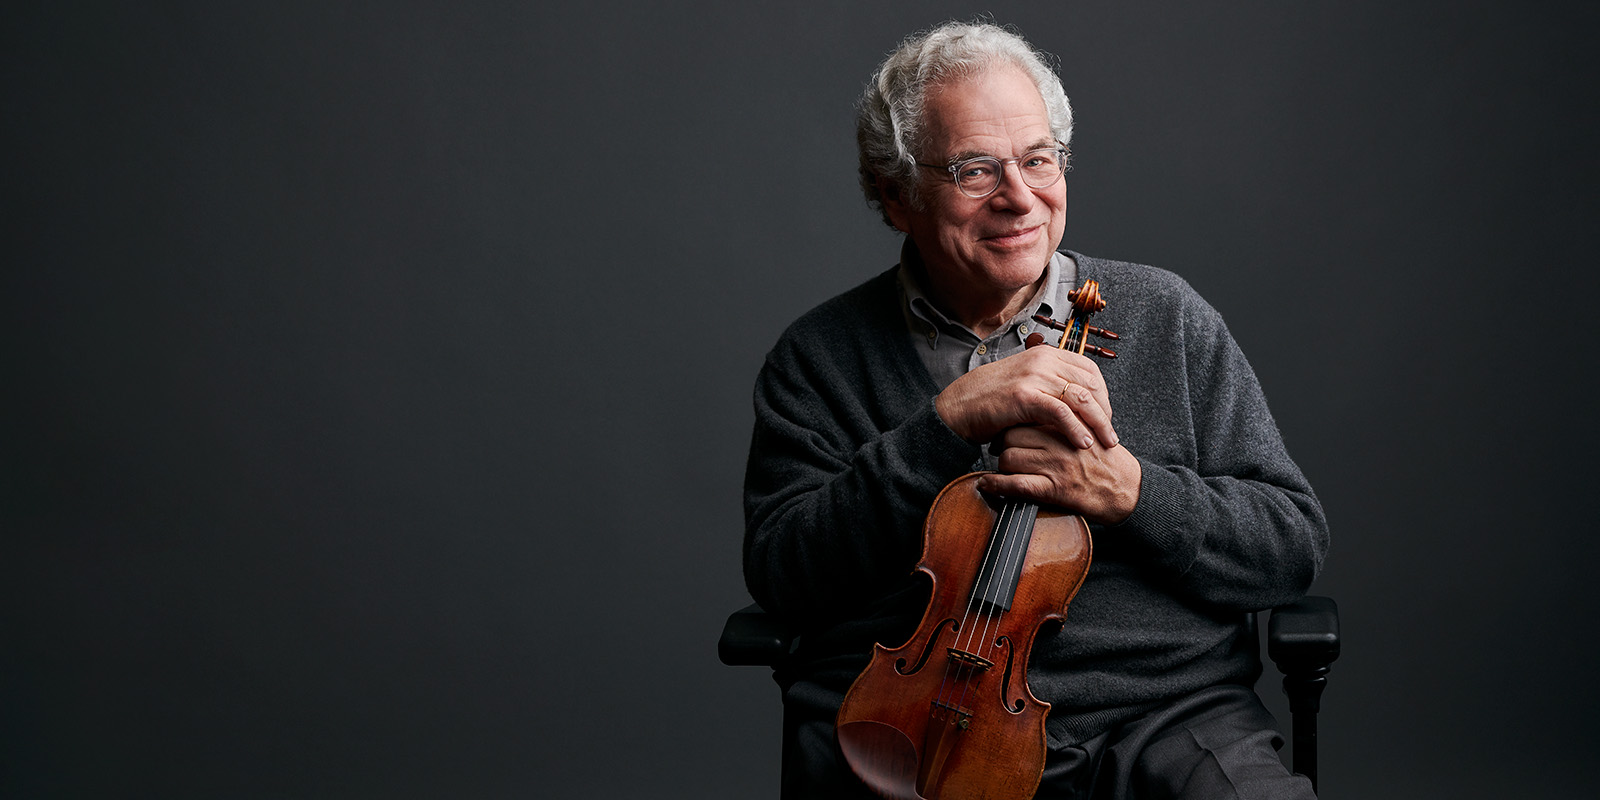 Violinist Itzhak Perlman Returns to Athens For Sold-Out Performance April 29